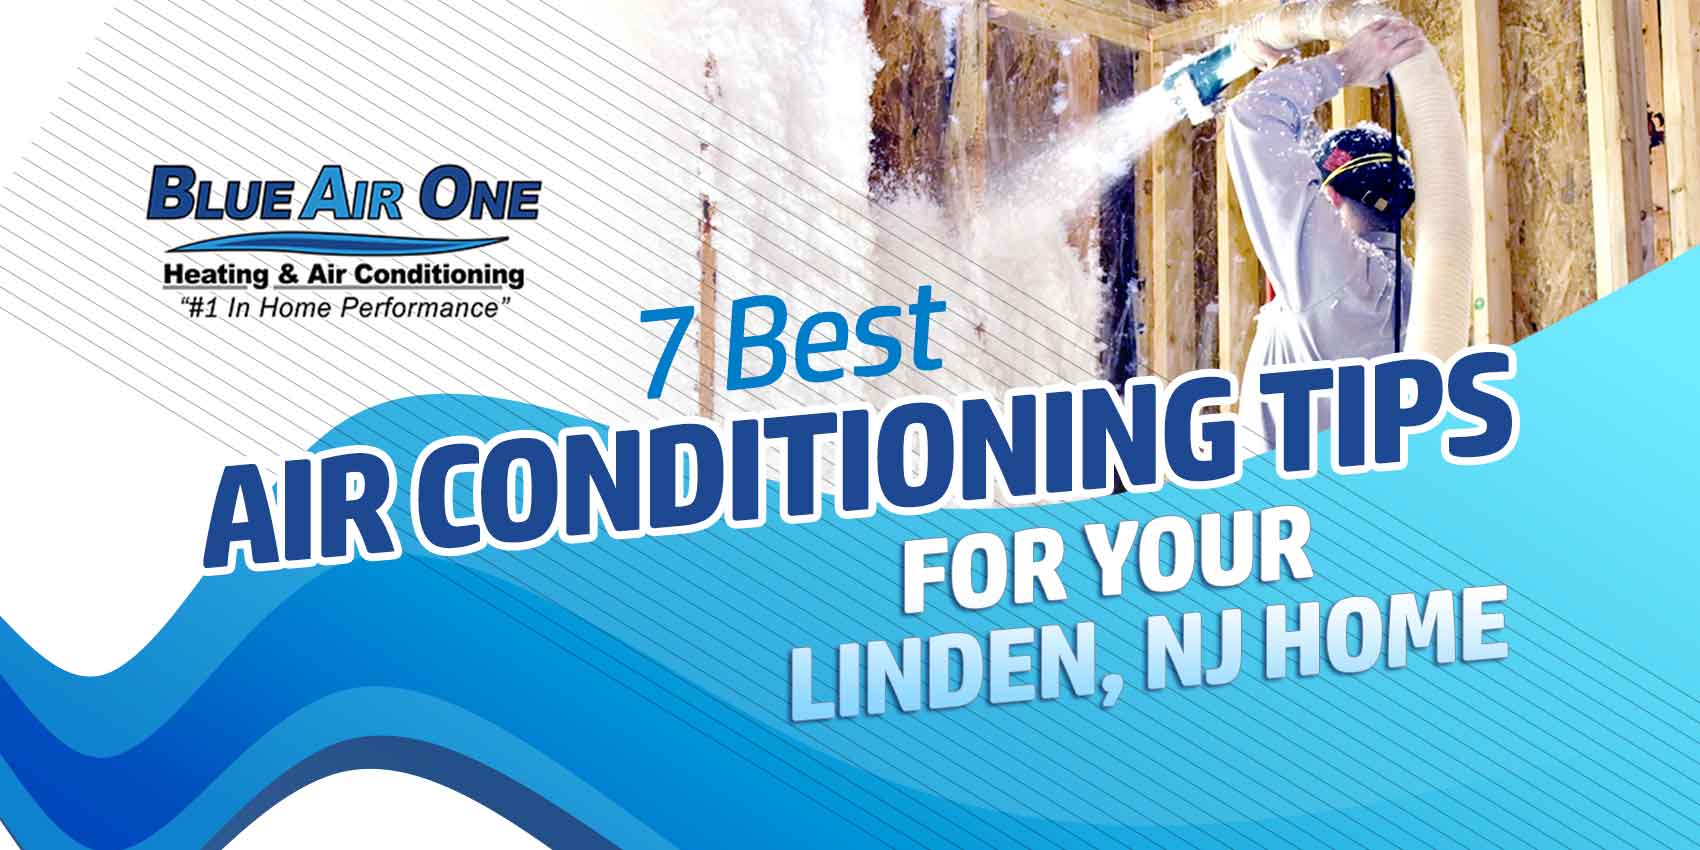 7 Best Air Conditioning Tips for Your Linden, NJ Home